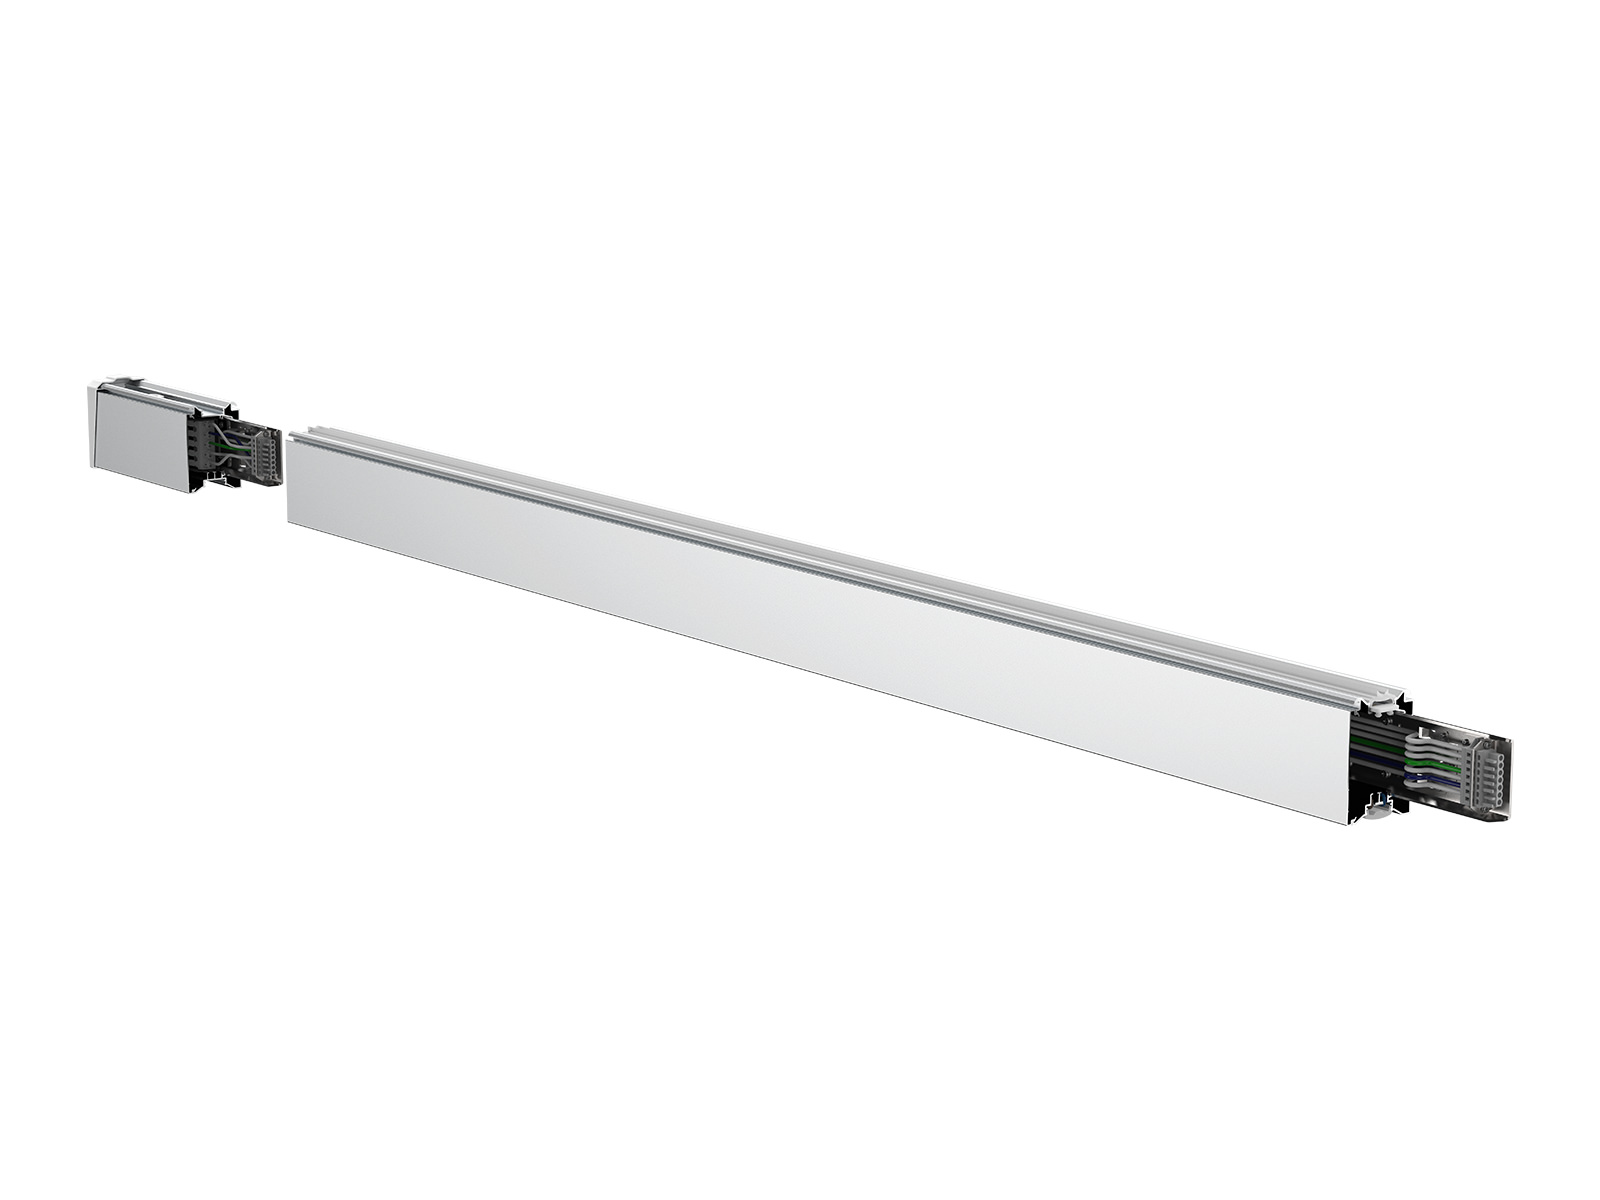 link able, dimmable with up light optional  linear light